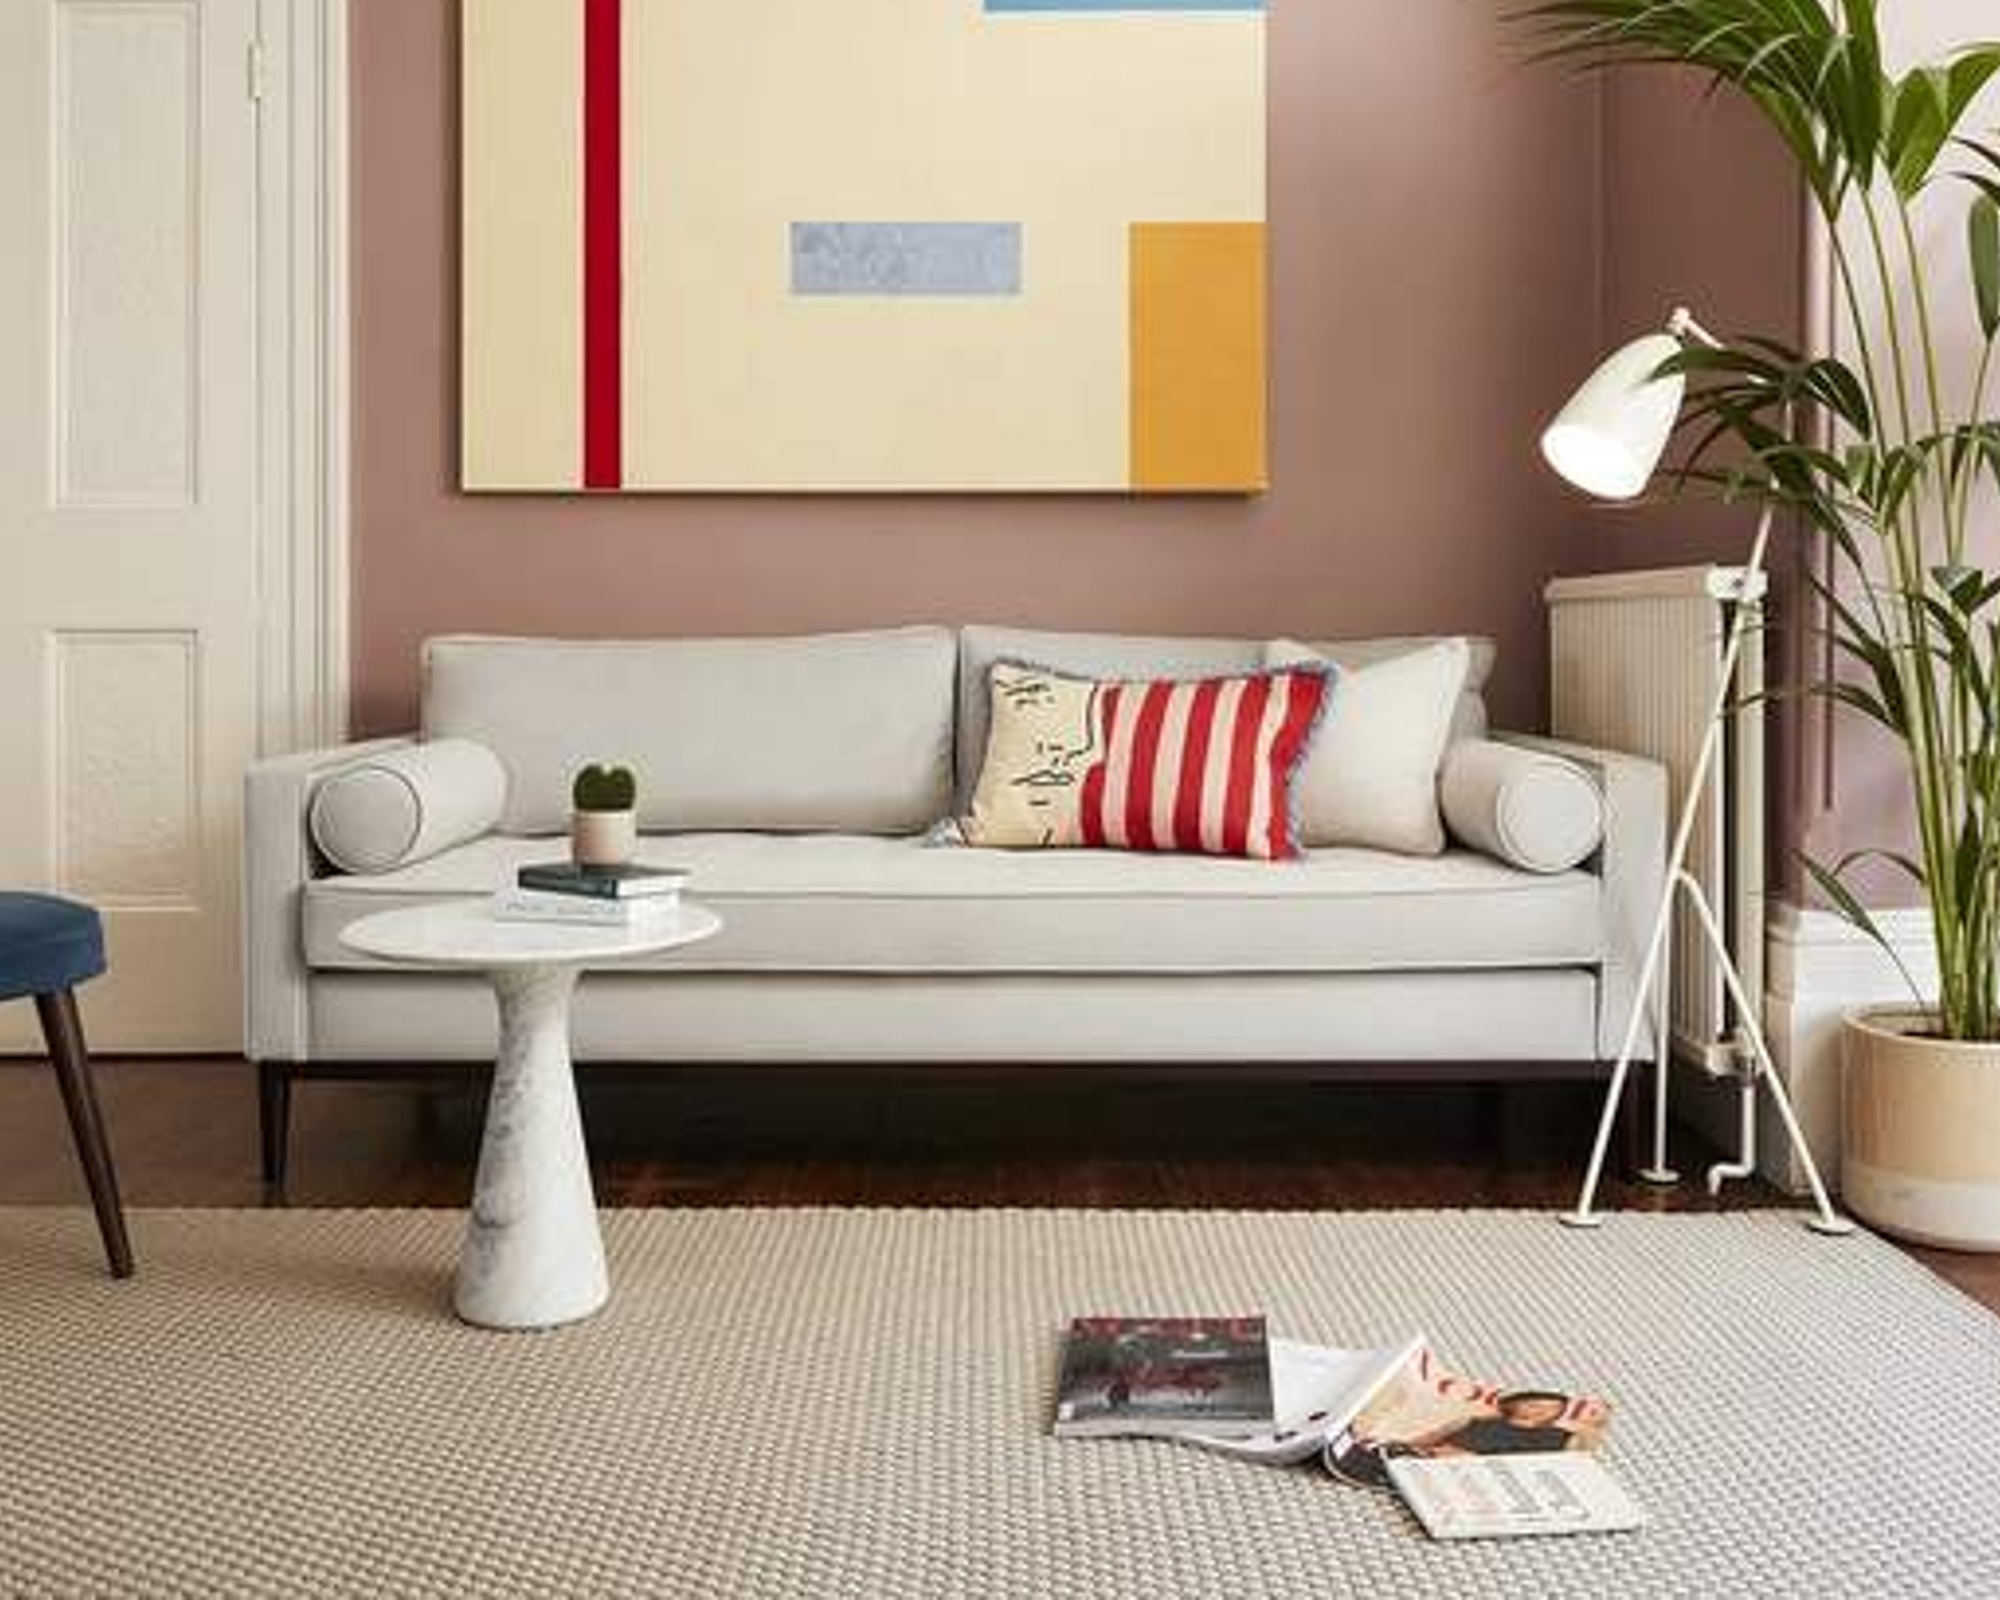 A pale grey sofa in a modern living room with contemporary art on the wall